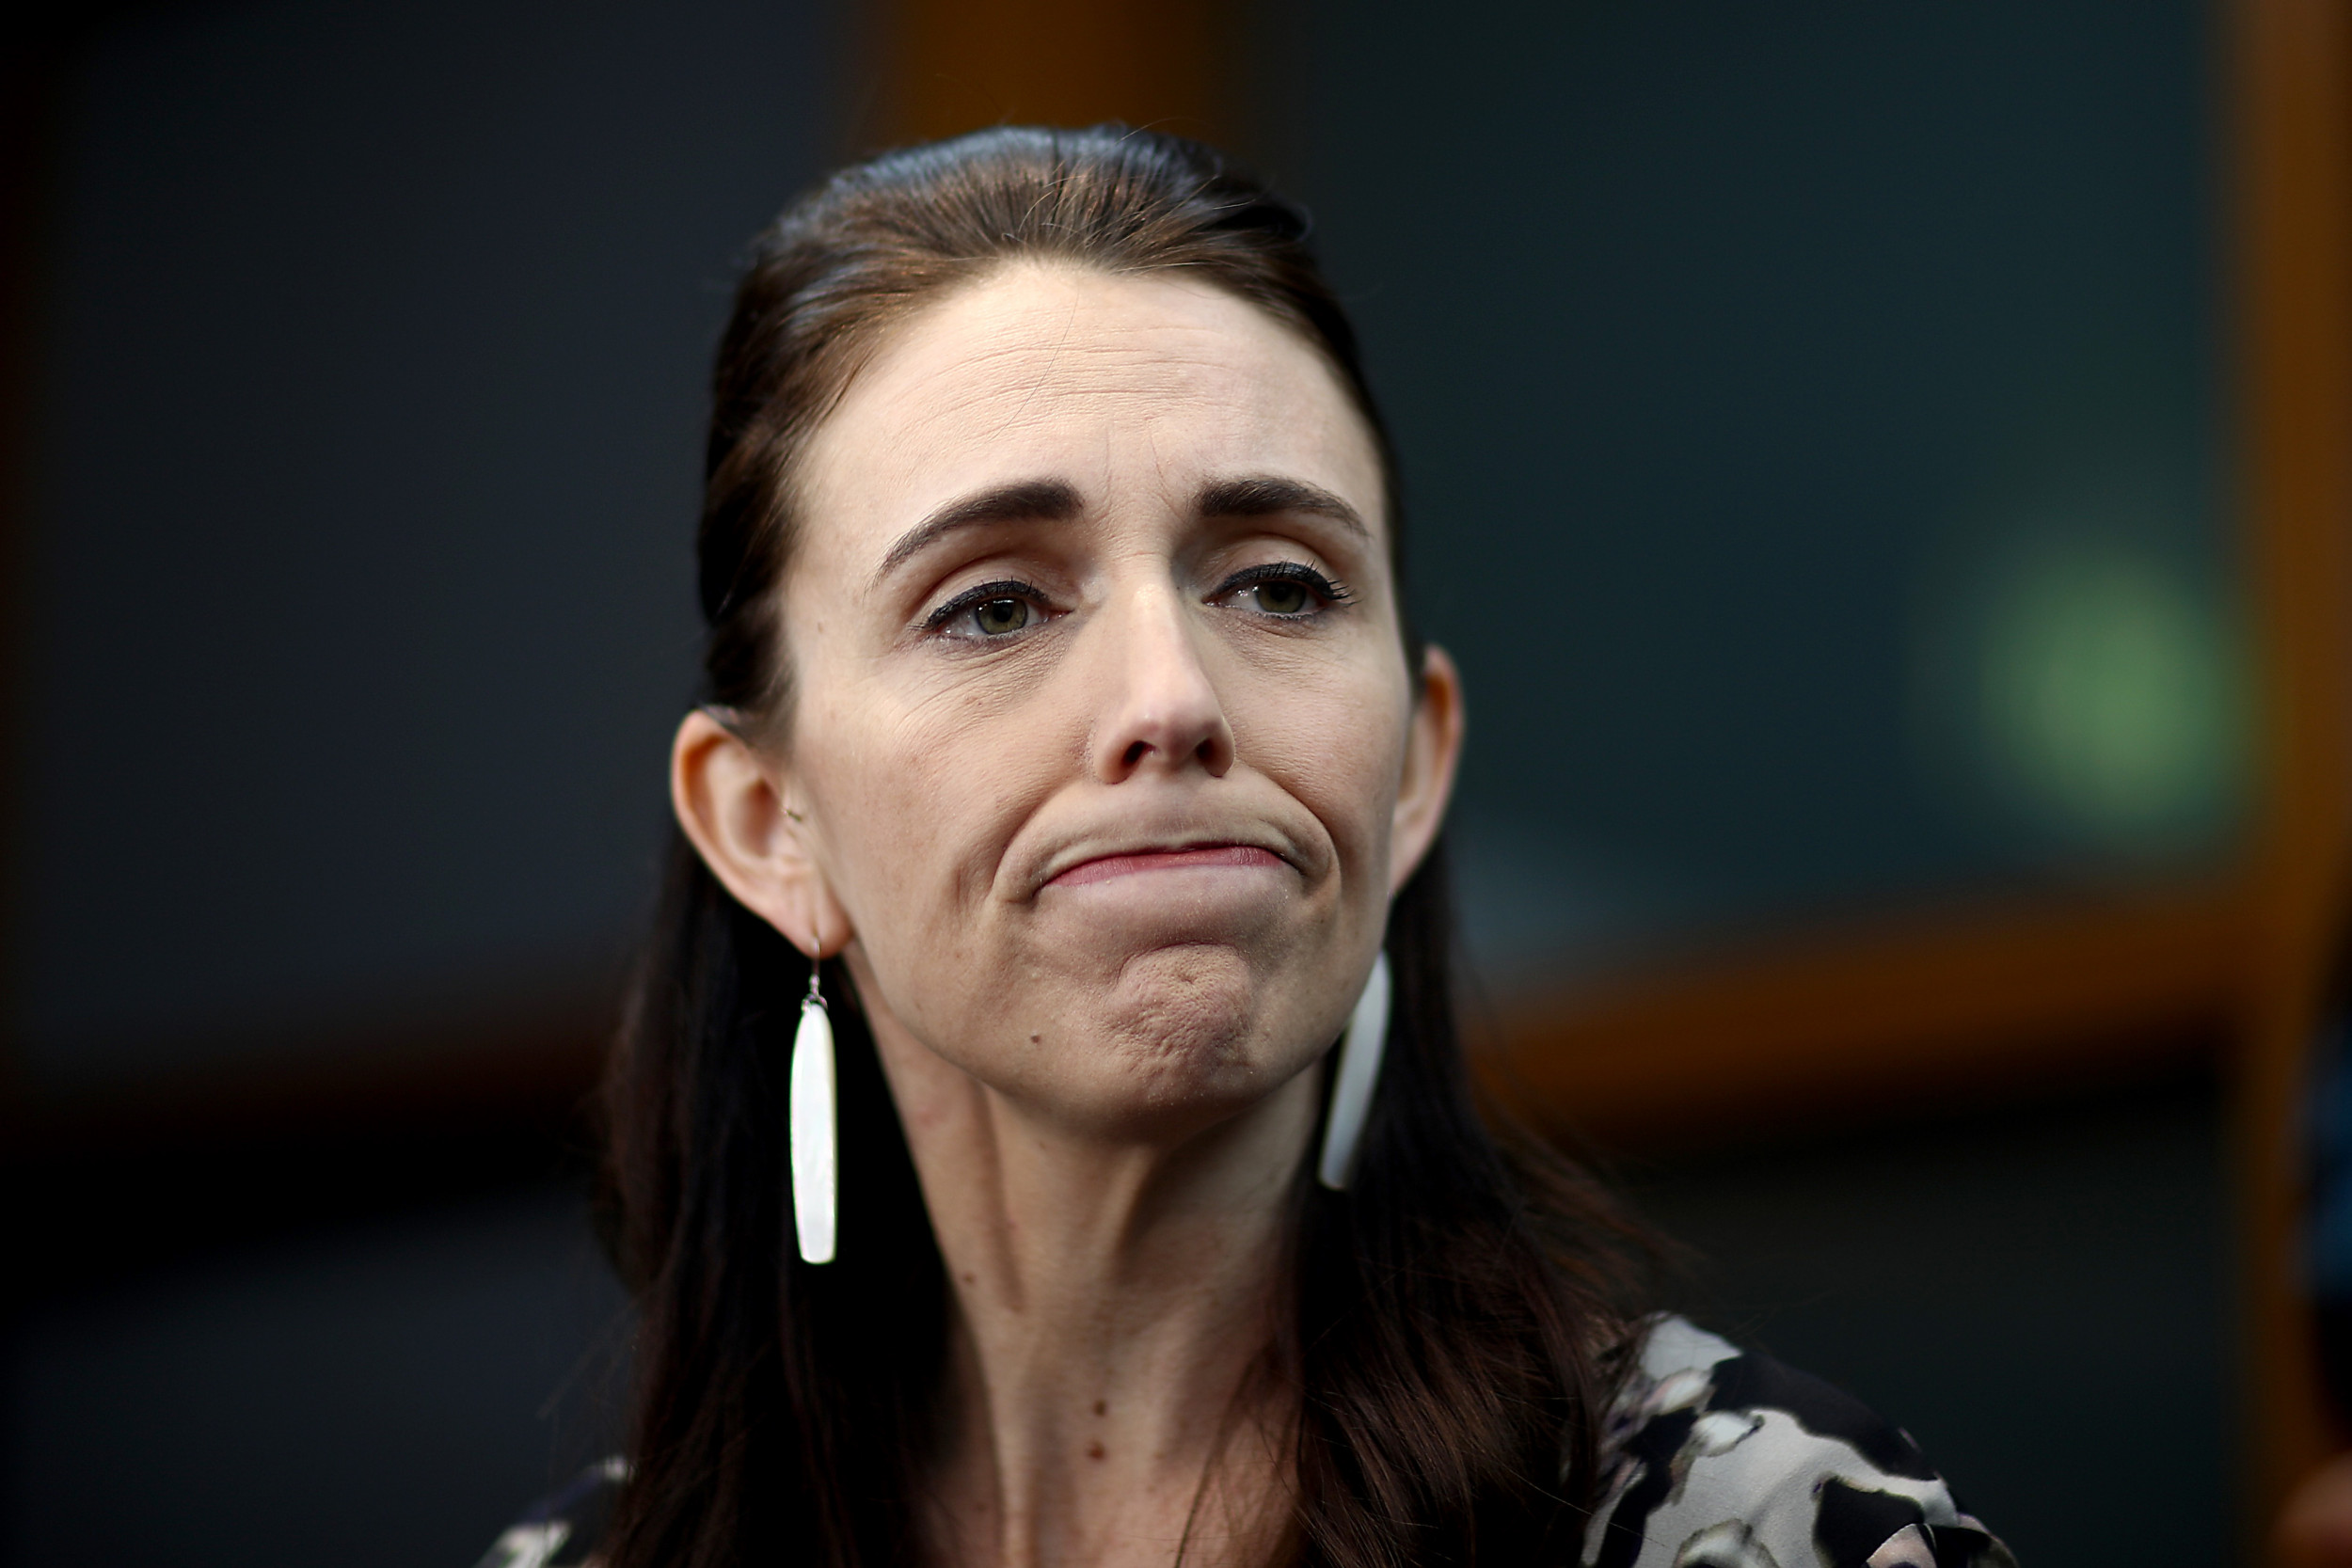 New Zealand Prime Minister Expresses Concern LGBTQ Conversion Therapy Ban  Could Harm Religious Freedom